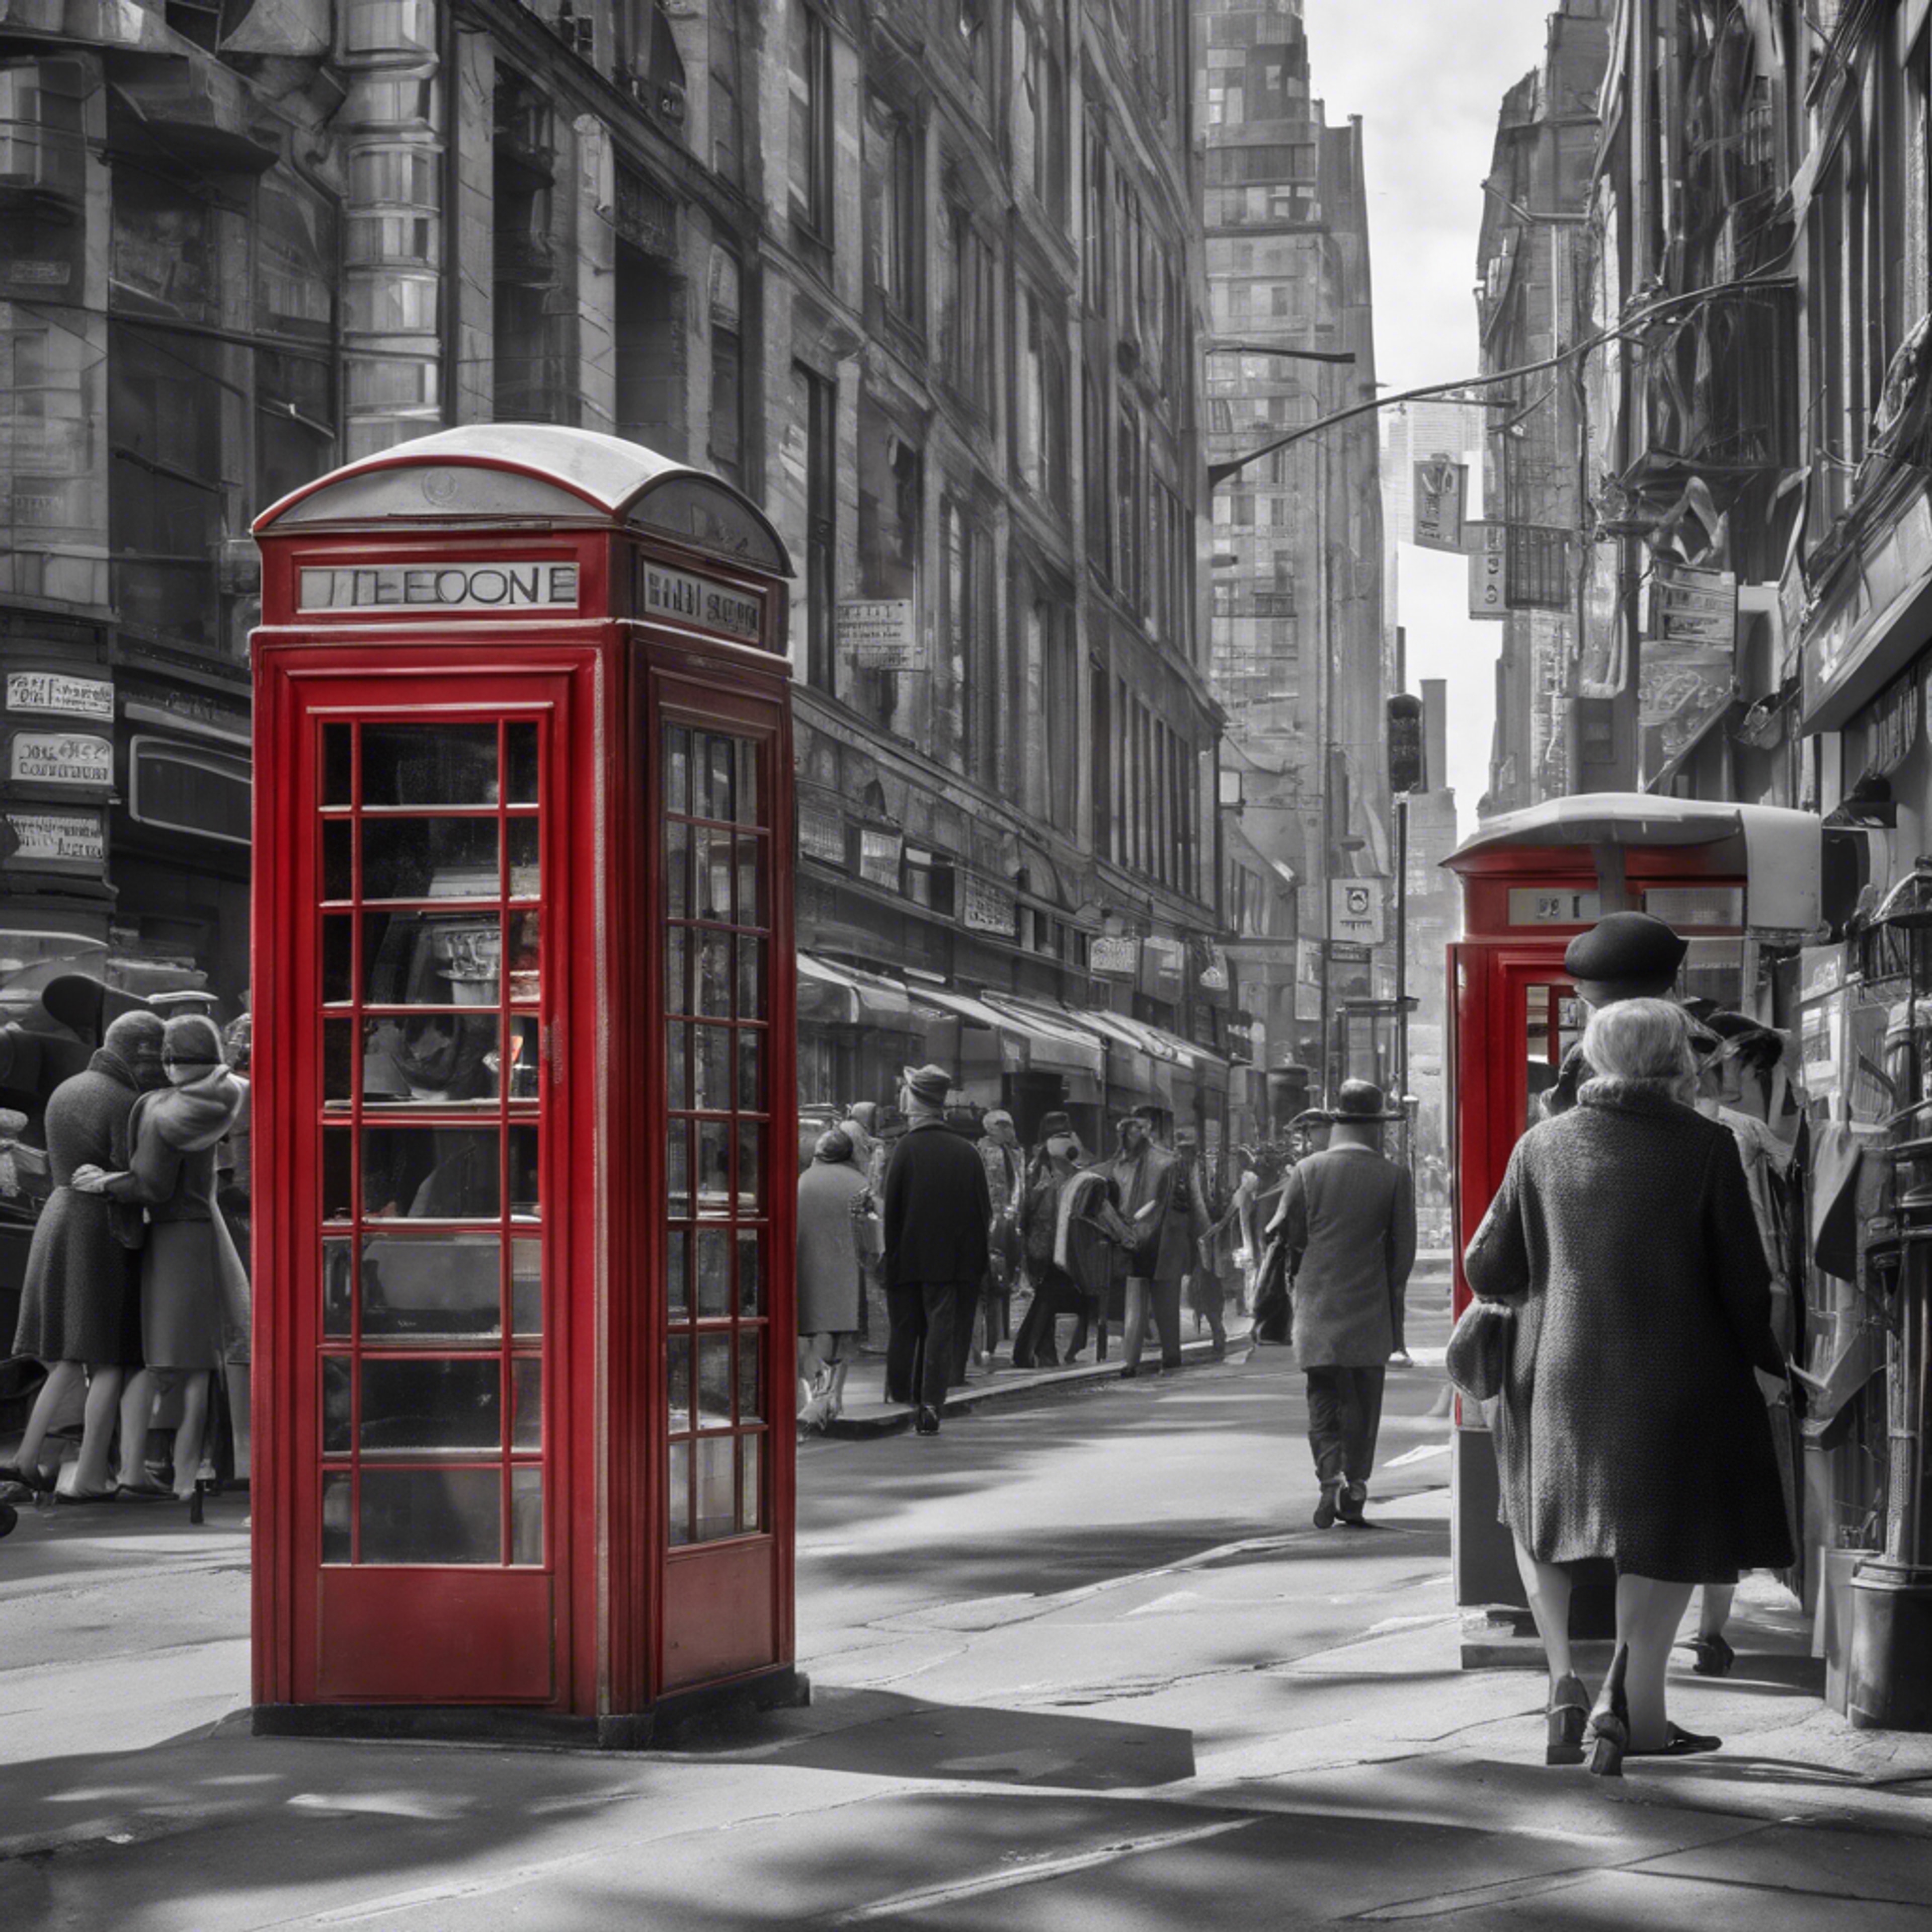 A black and white picture of a busy city street in the 1960s, with one characteristic iconic red phone booth. Tapet[8cad1b57085c4579b492]